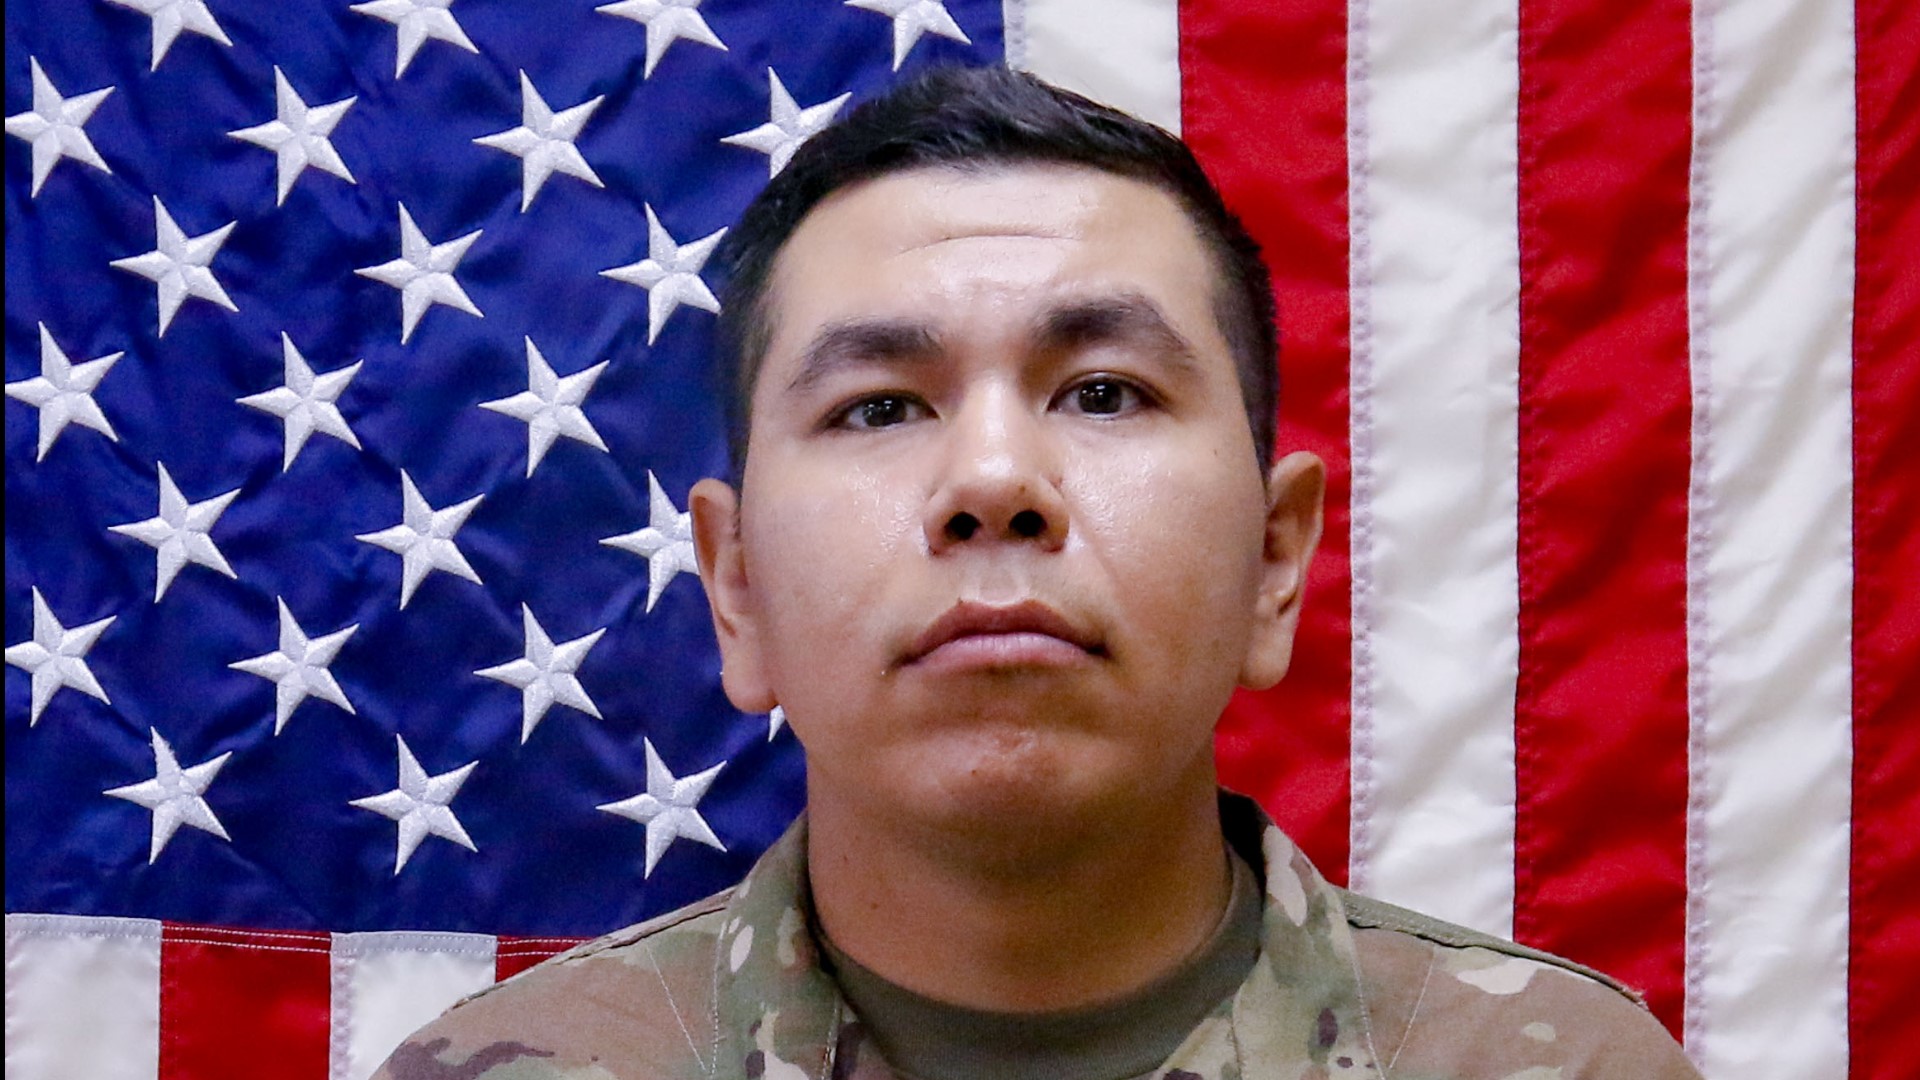 Two Fort Hood soldiers were killed in training accidents this week.